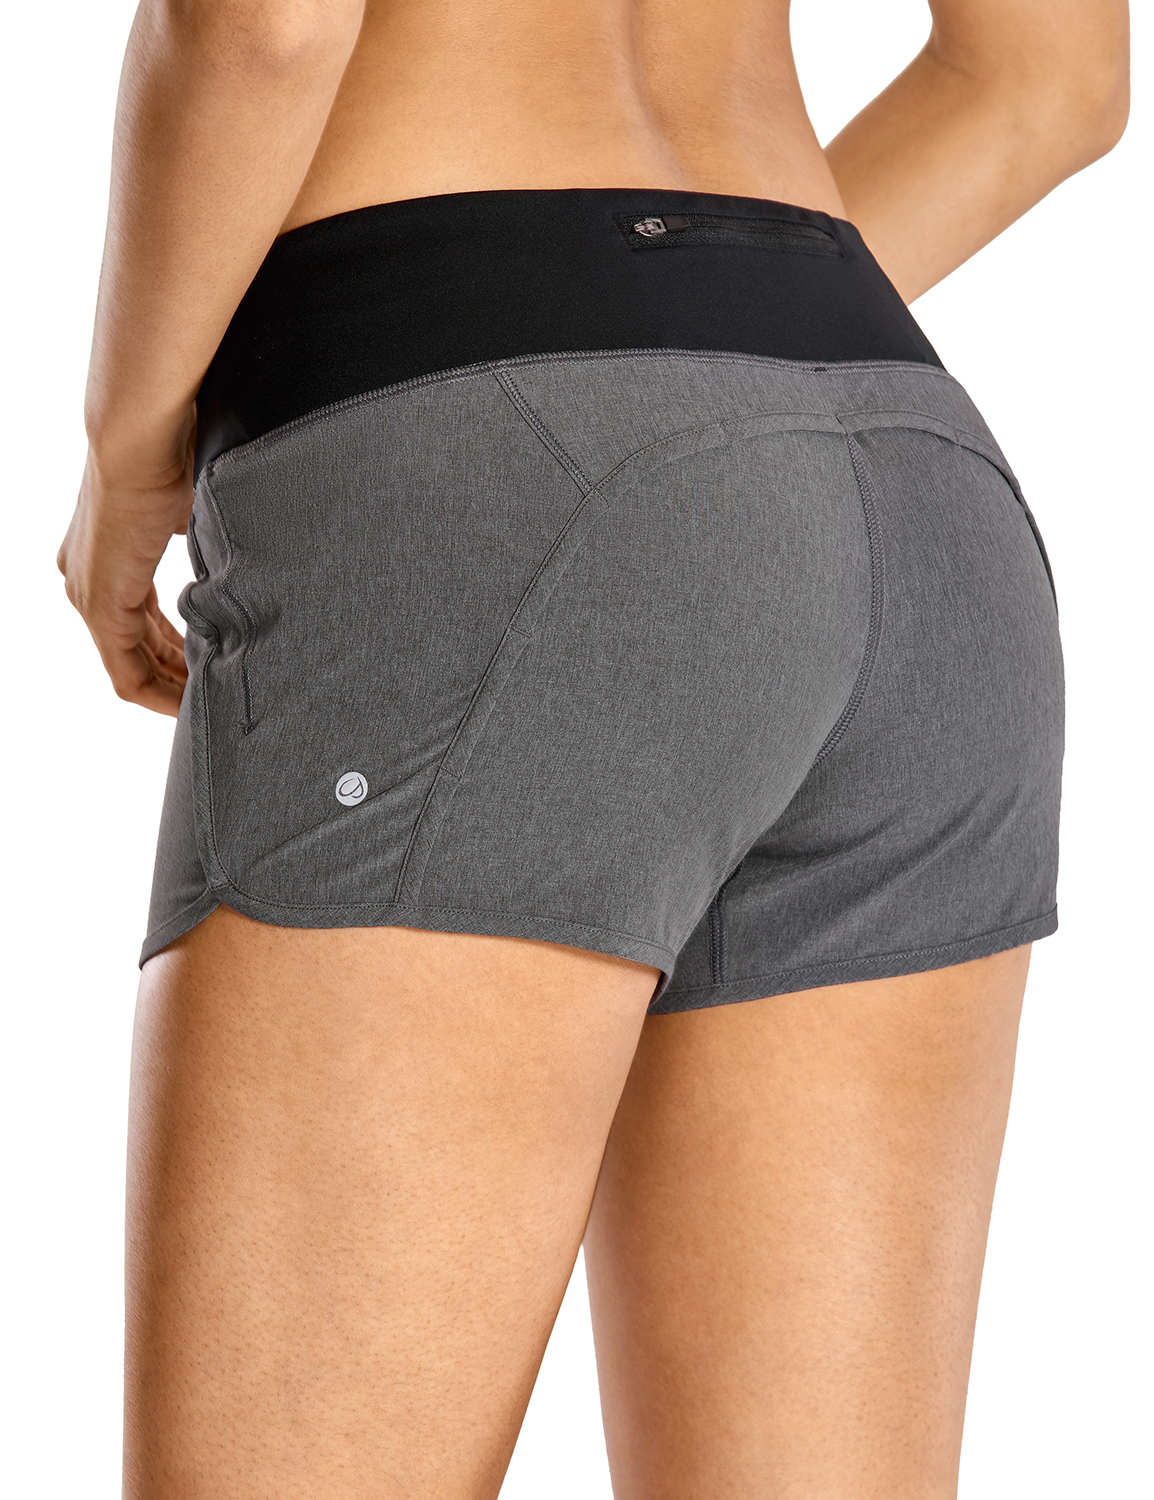 CRZ YOGA Women Sport Shorts Quick-Dry Athletic Run Workout with Zip ...